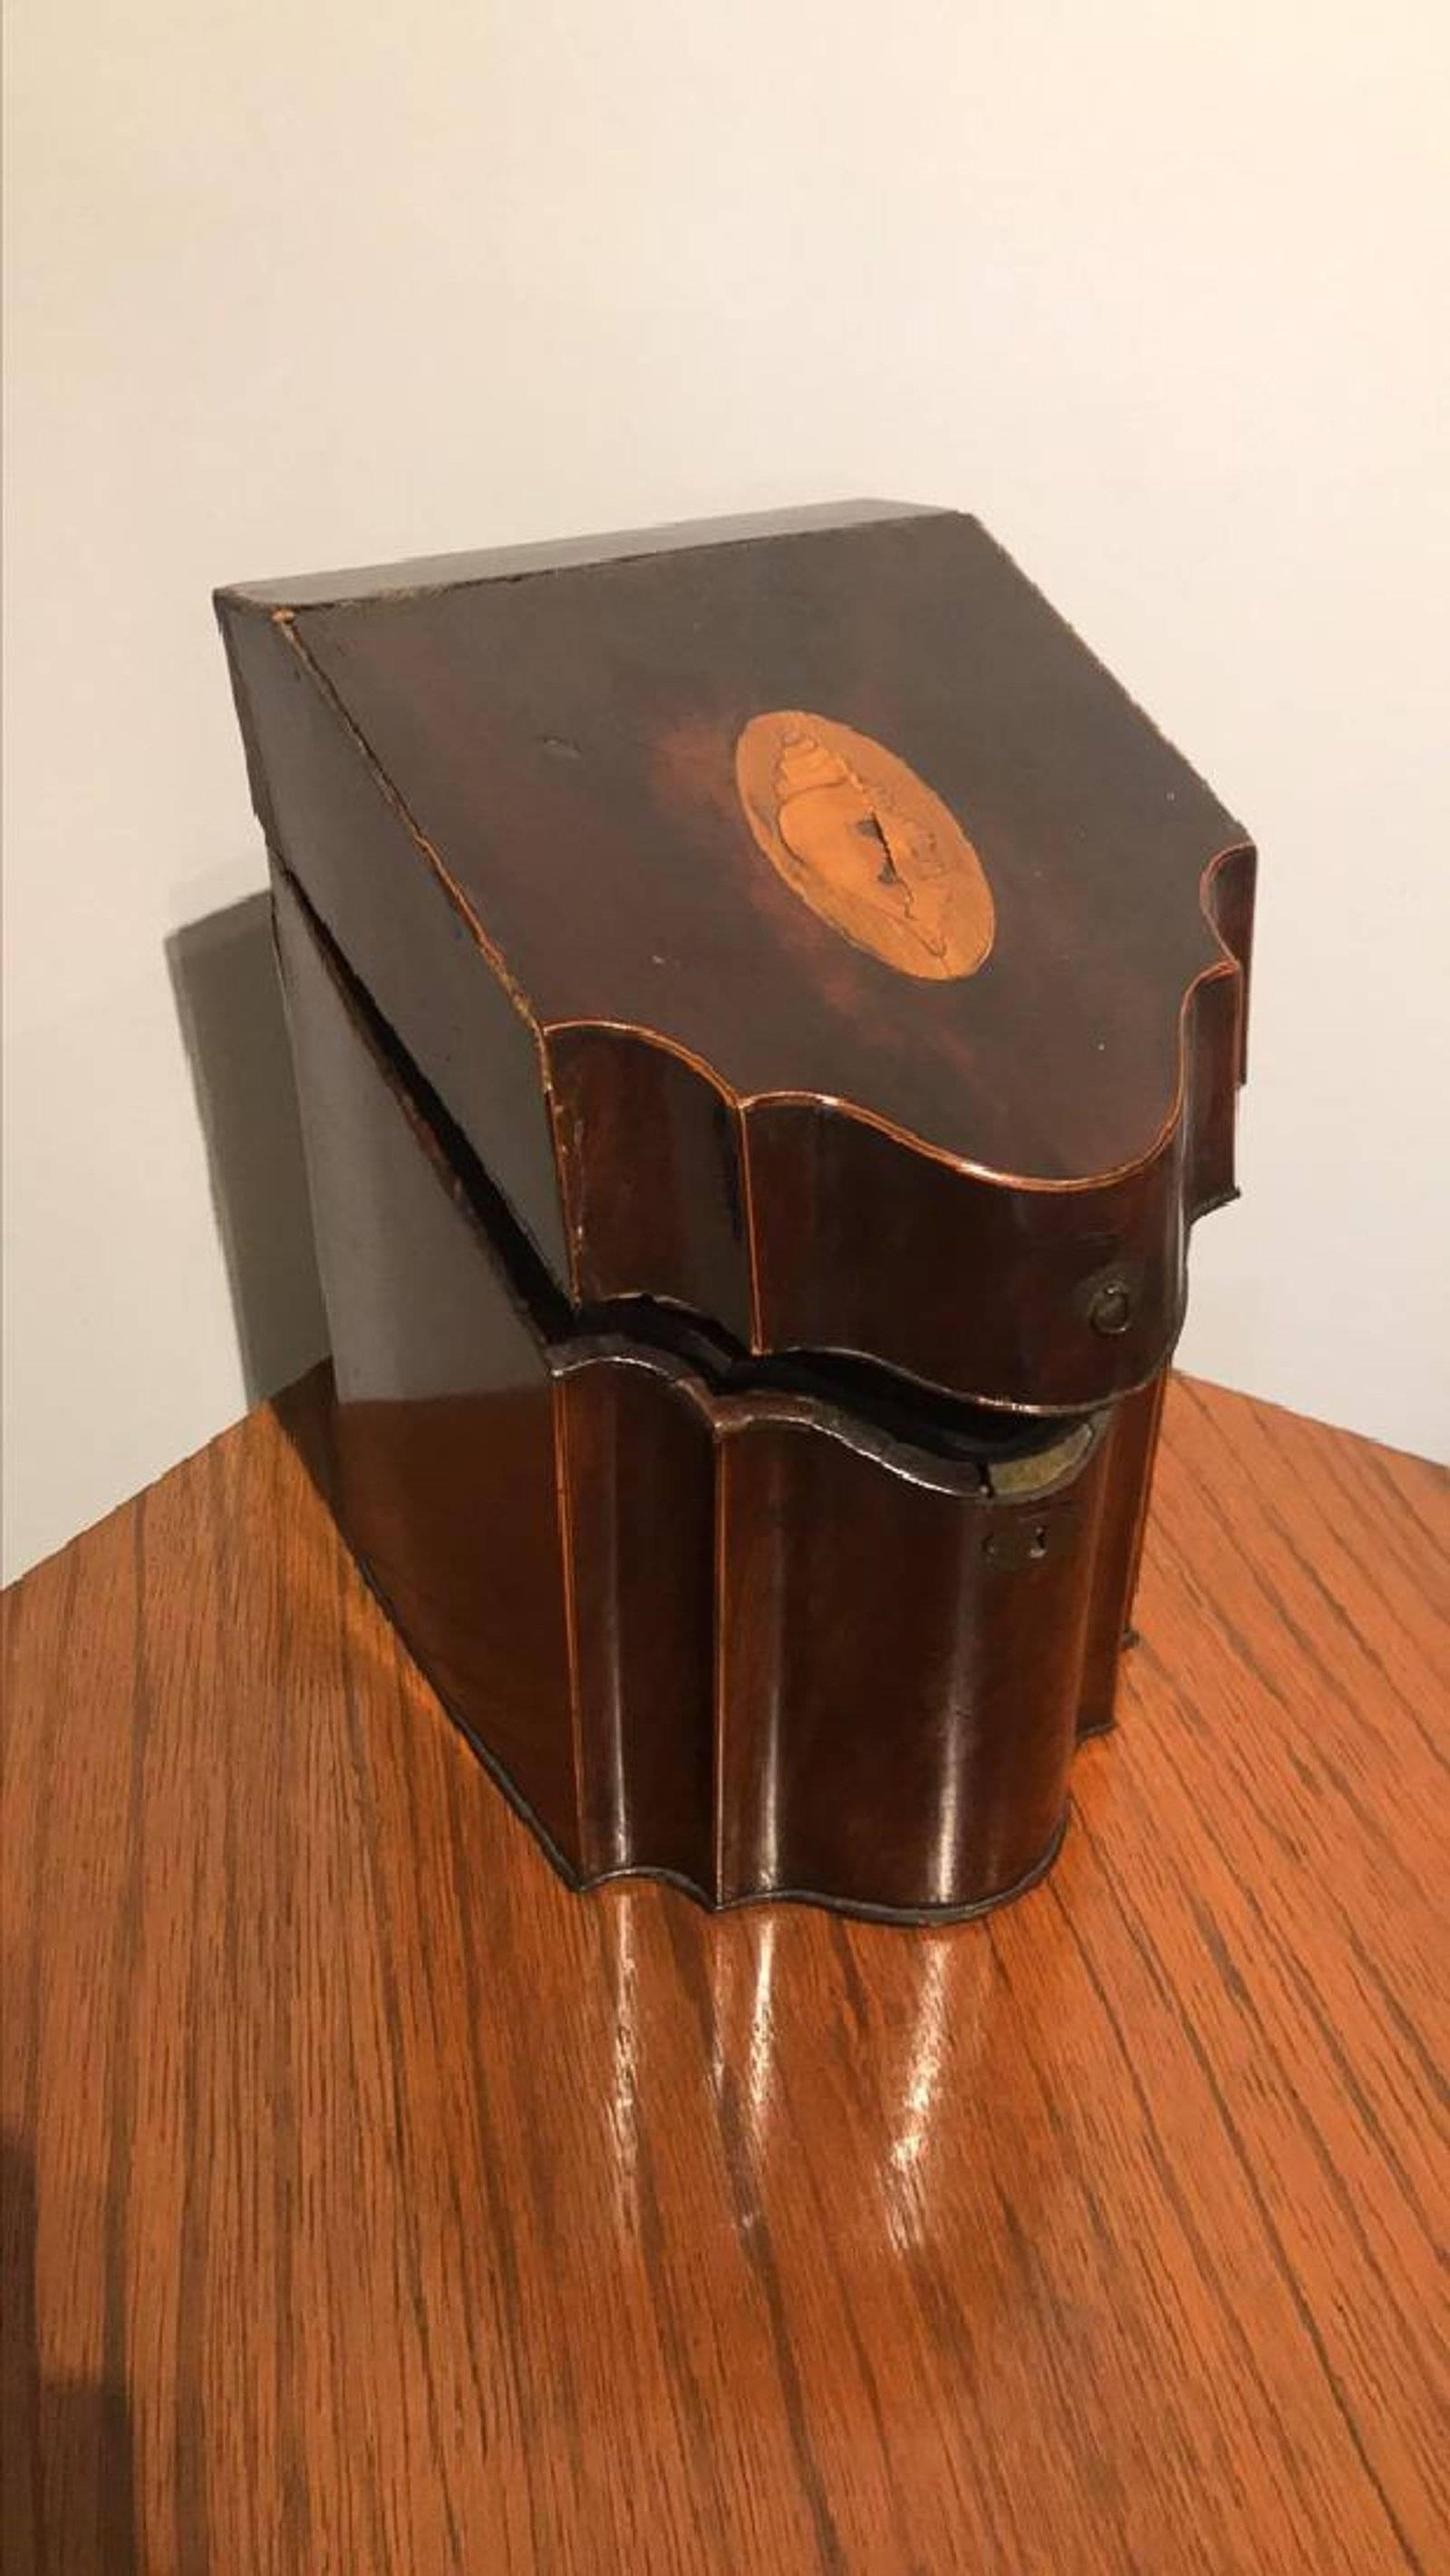 19th century Georgian mahogany slope top and shaped front liqueur box. The satinwood conch shell inlaid top opens to a fitted interior having hand blown gold overlay bottles.

One bottle has chipped lip, box is in old antique condition, good for